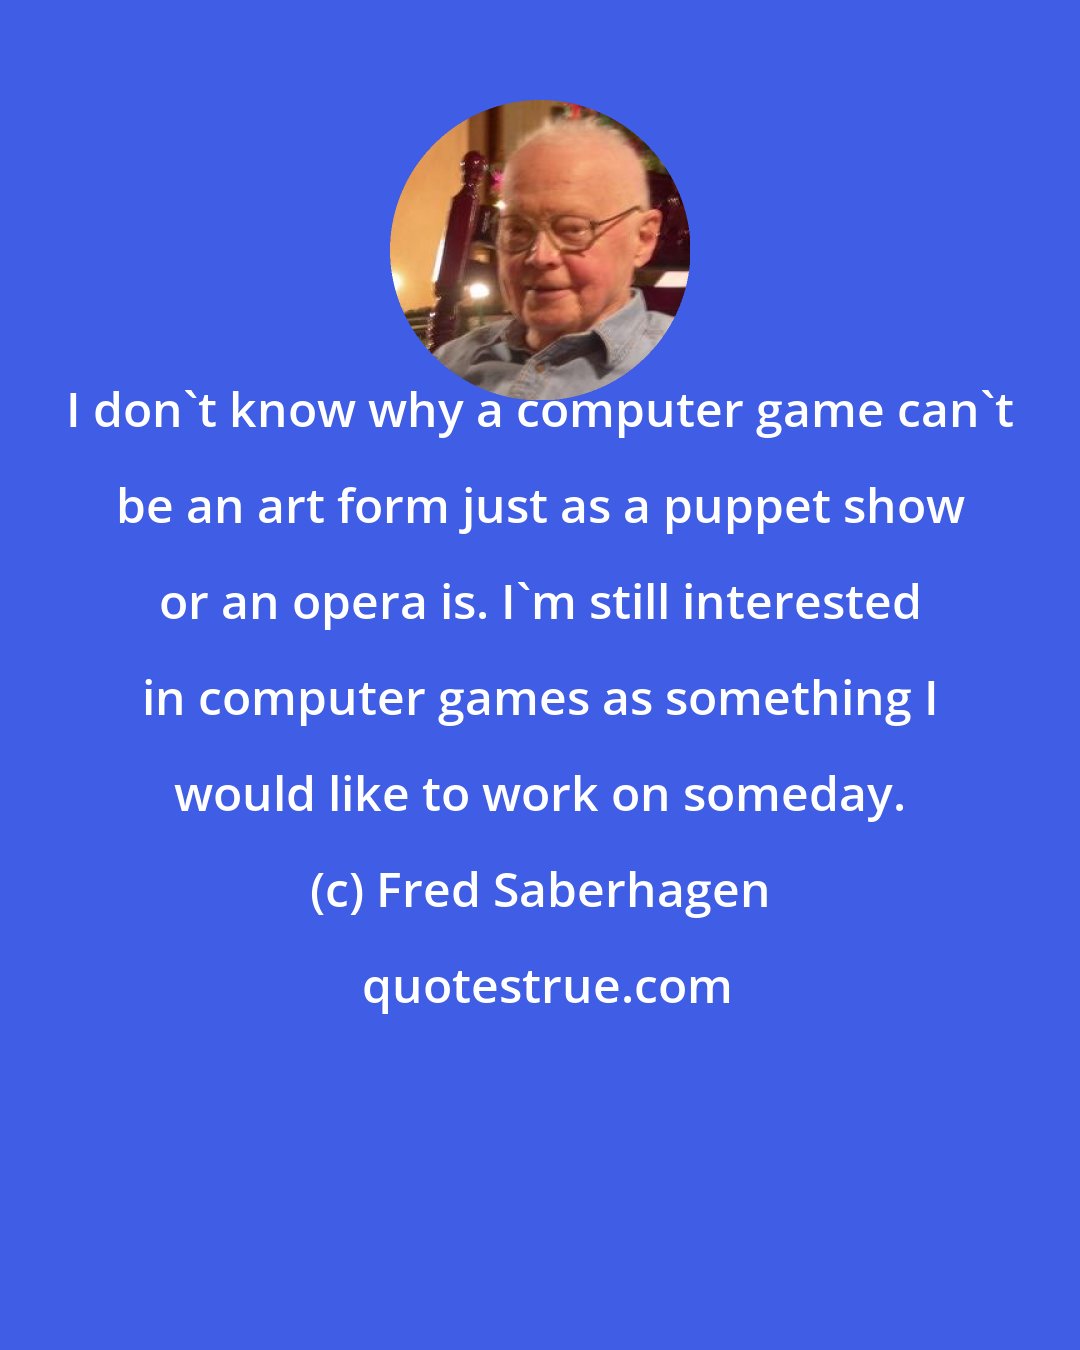 Fred Saberhagen: I don't know why a computer game can't be an art form just as a puppet show or an opera is. I'm still interested in computer games as something I would like to work on someday.